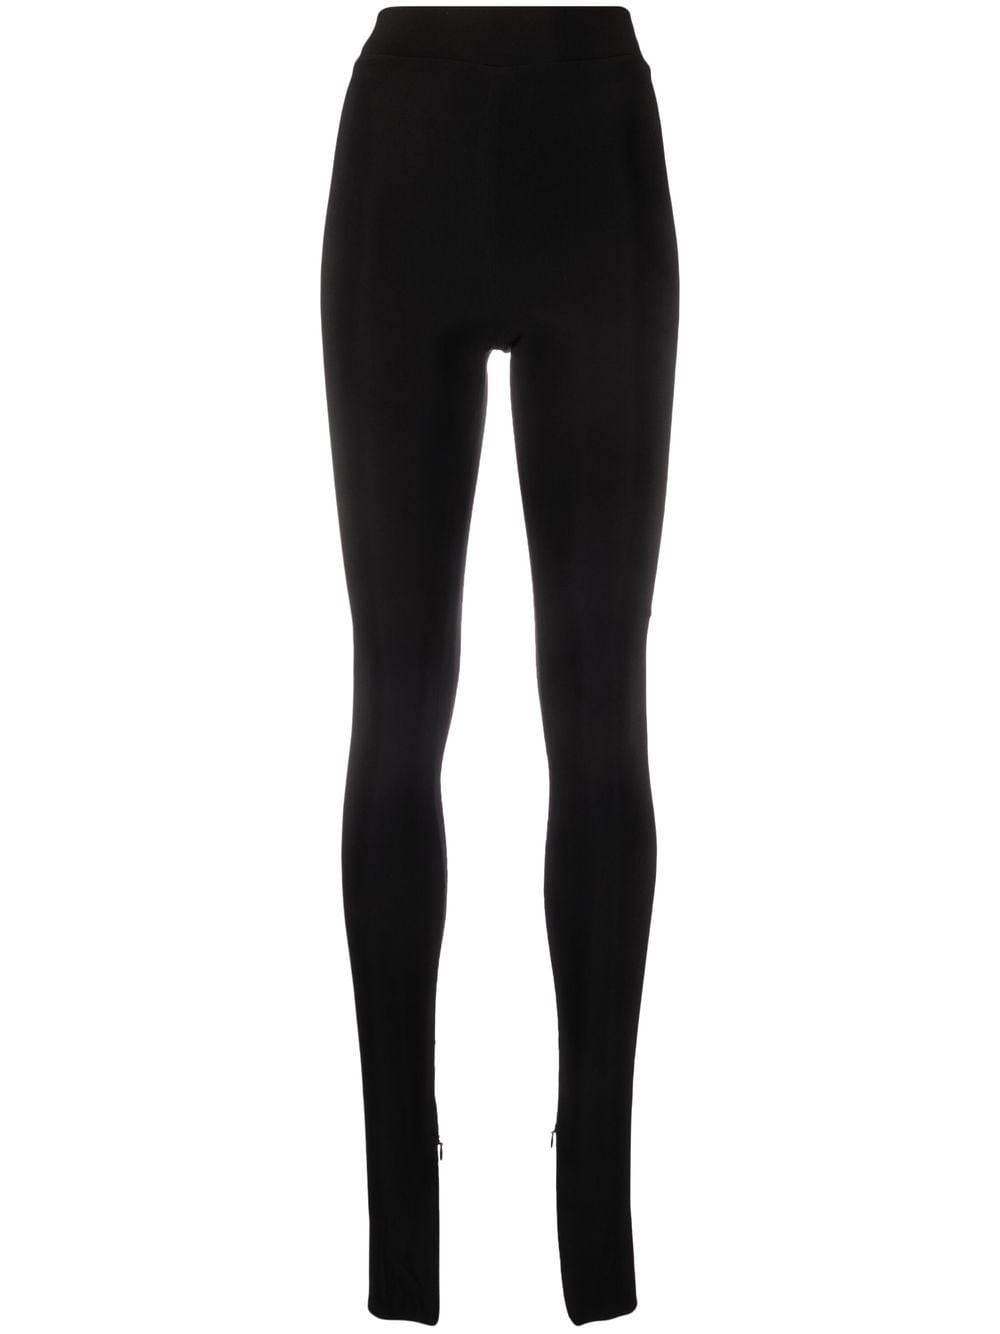 LAQUAN SMITH HIGH-WAISTED ZIP-DETAIL LEGGINGS